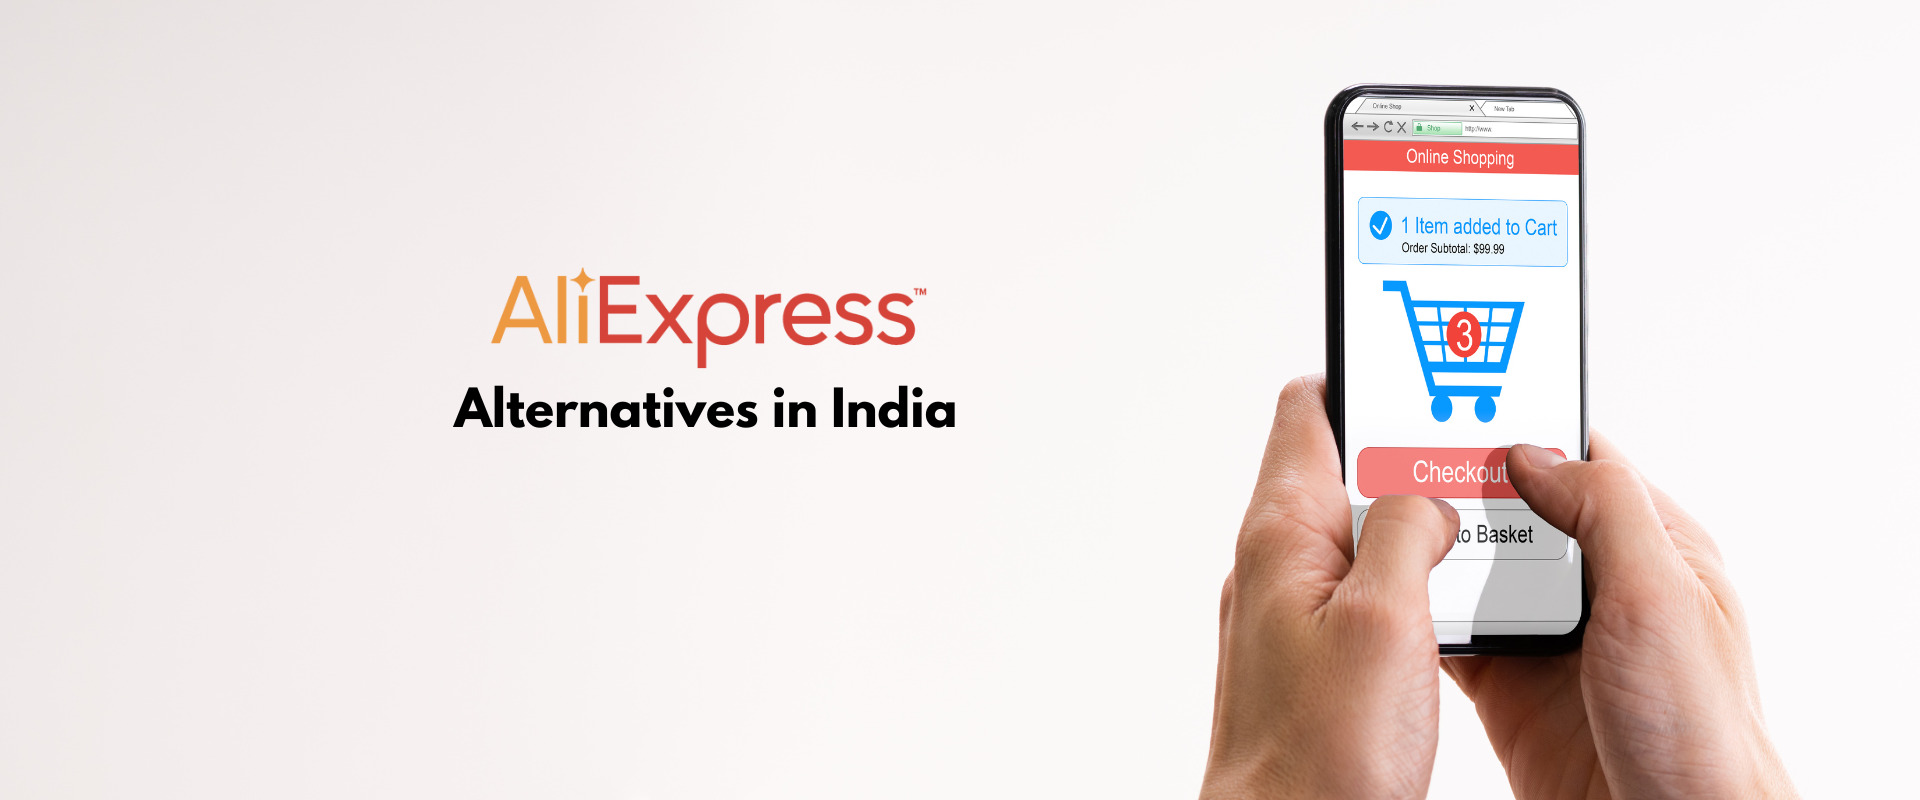 11 Alternatives of AliExpress in India | All You Need To Know About AliExpress